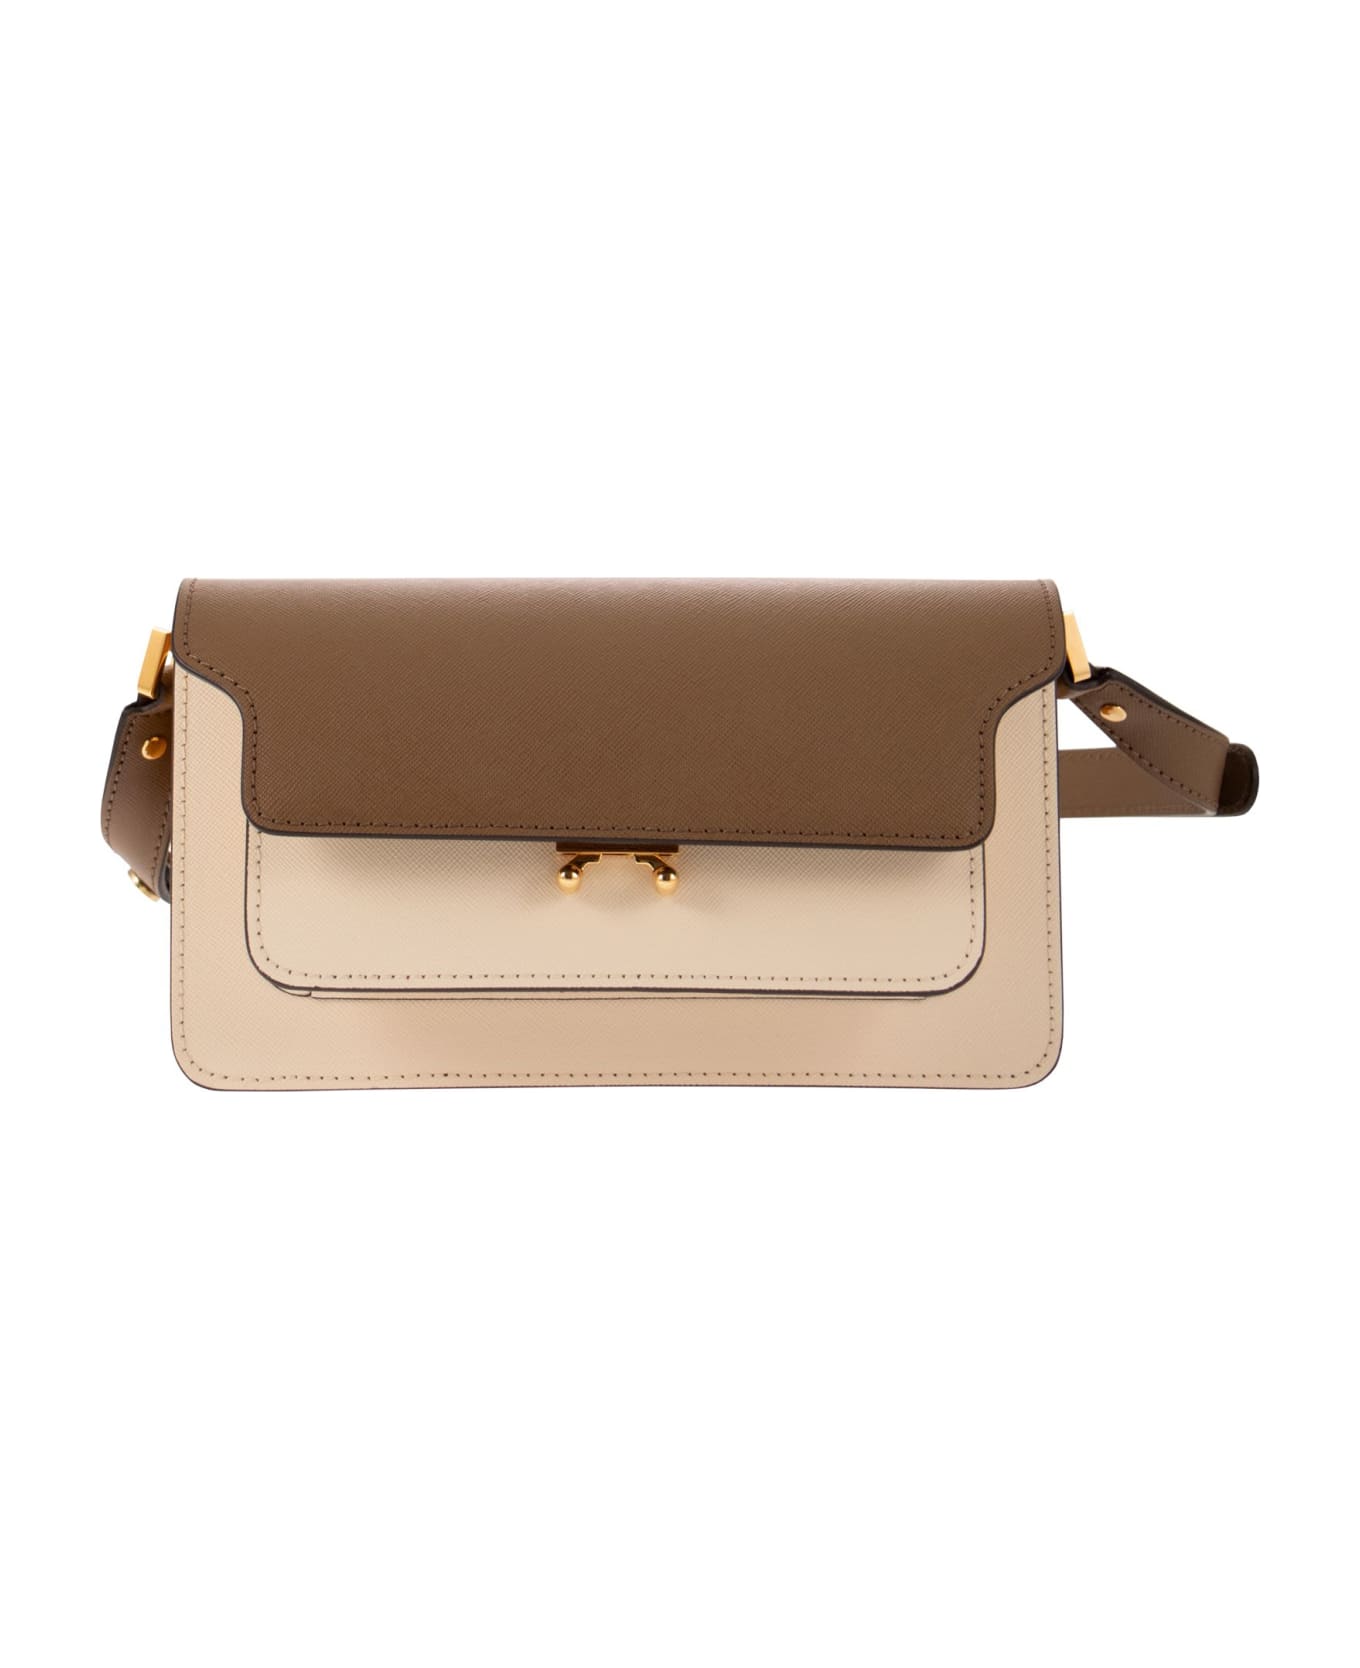 Marni White And Brown East/west Trunk Bag In Saffiano Leather - Brown ショルダーバッグ